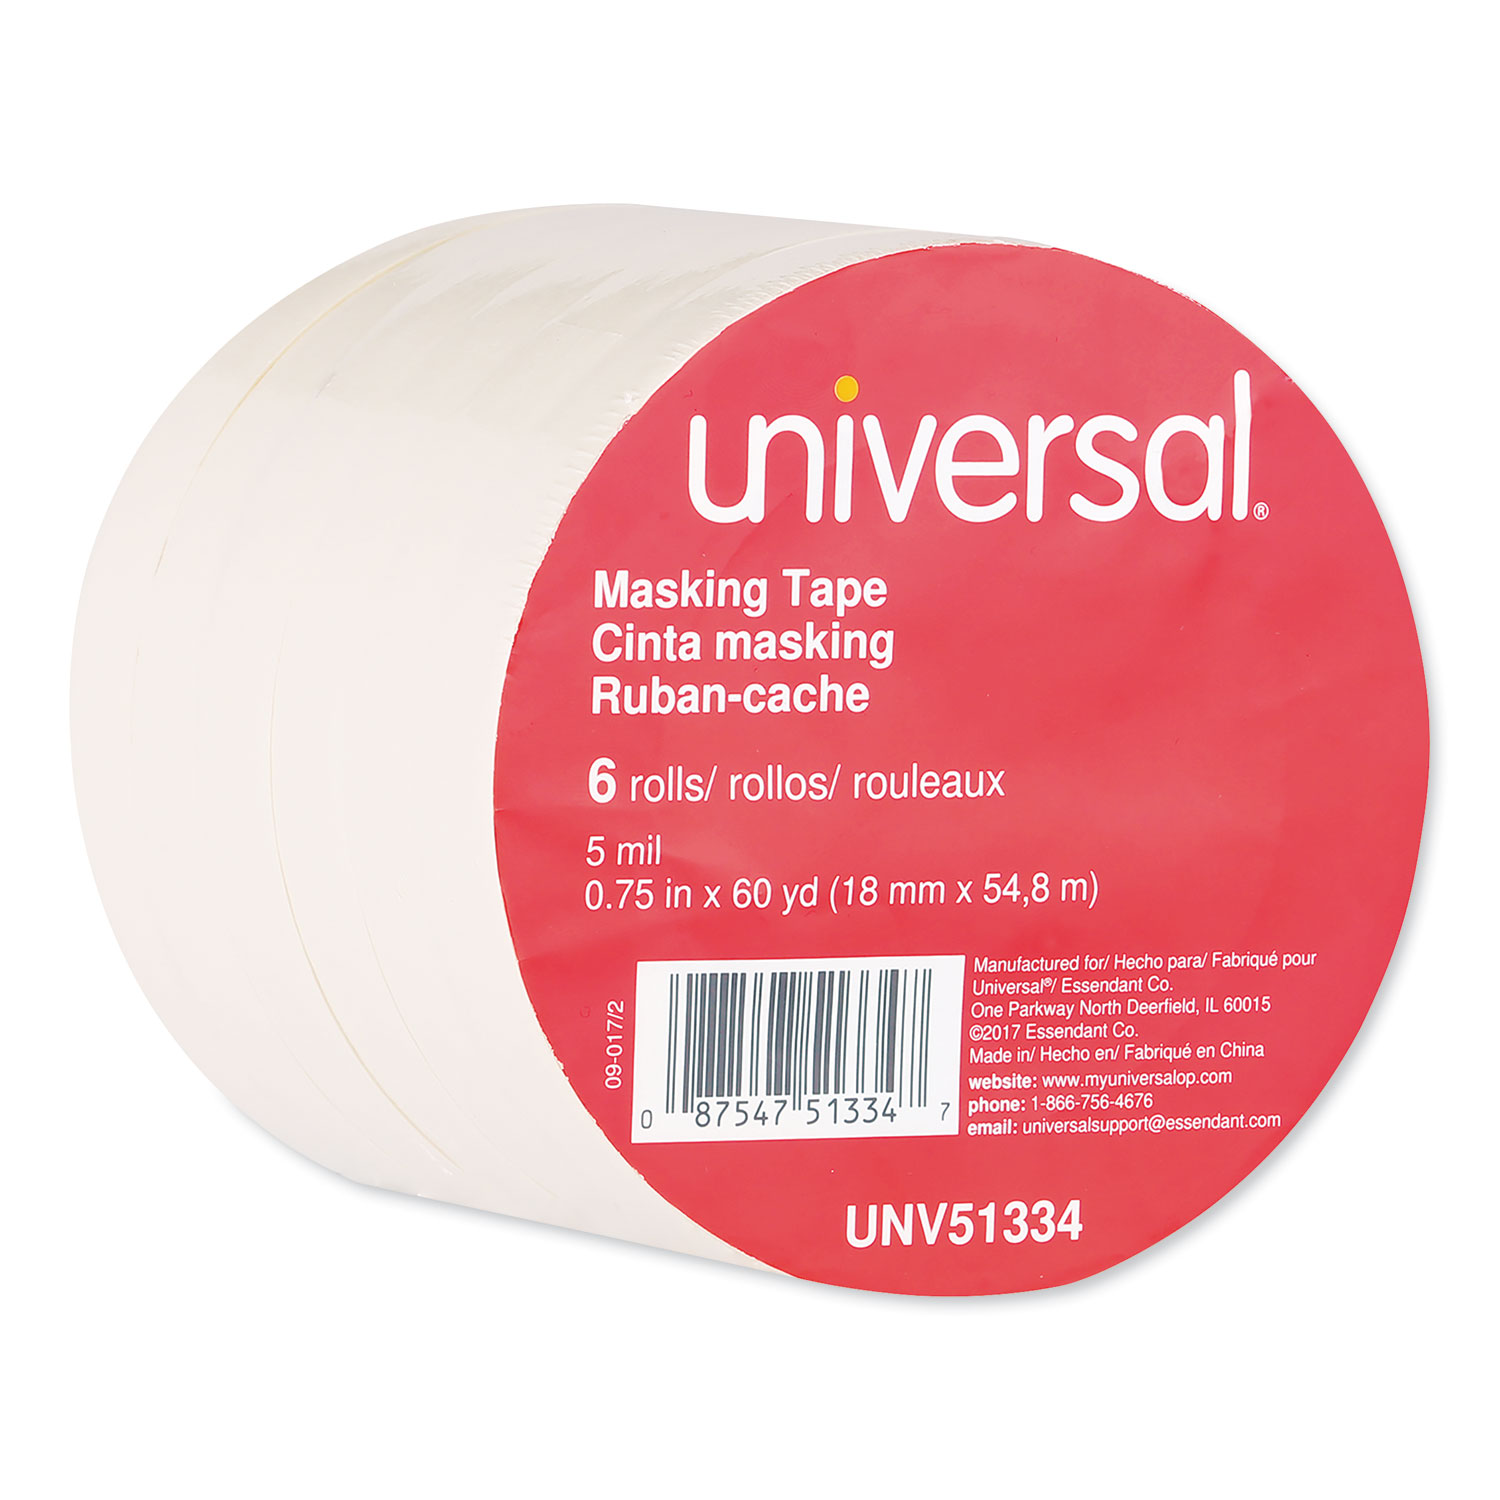  Universal UNV51334 Removable General-Purpose Masking Tape, 3 Core, 18 mm x 54.8 m, Beige, 6/Pack (UNV51334) 